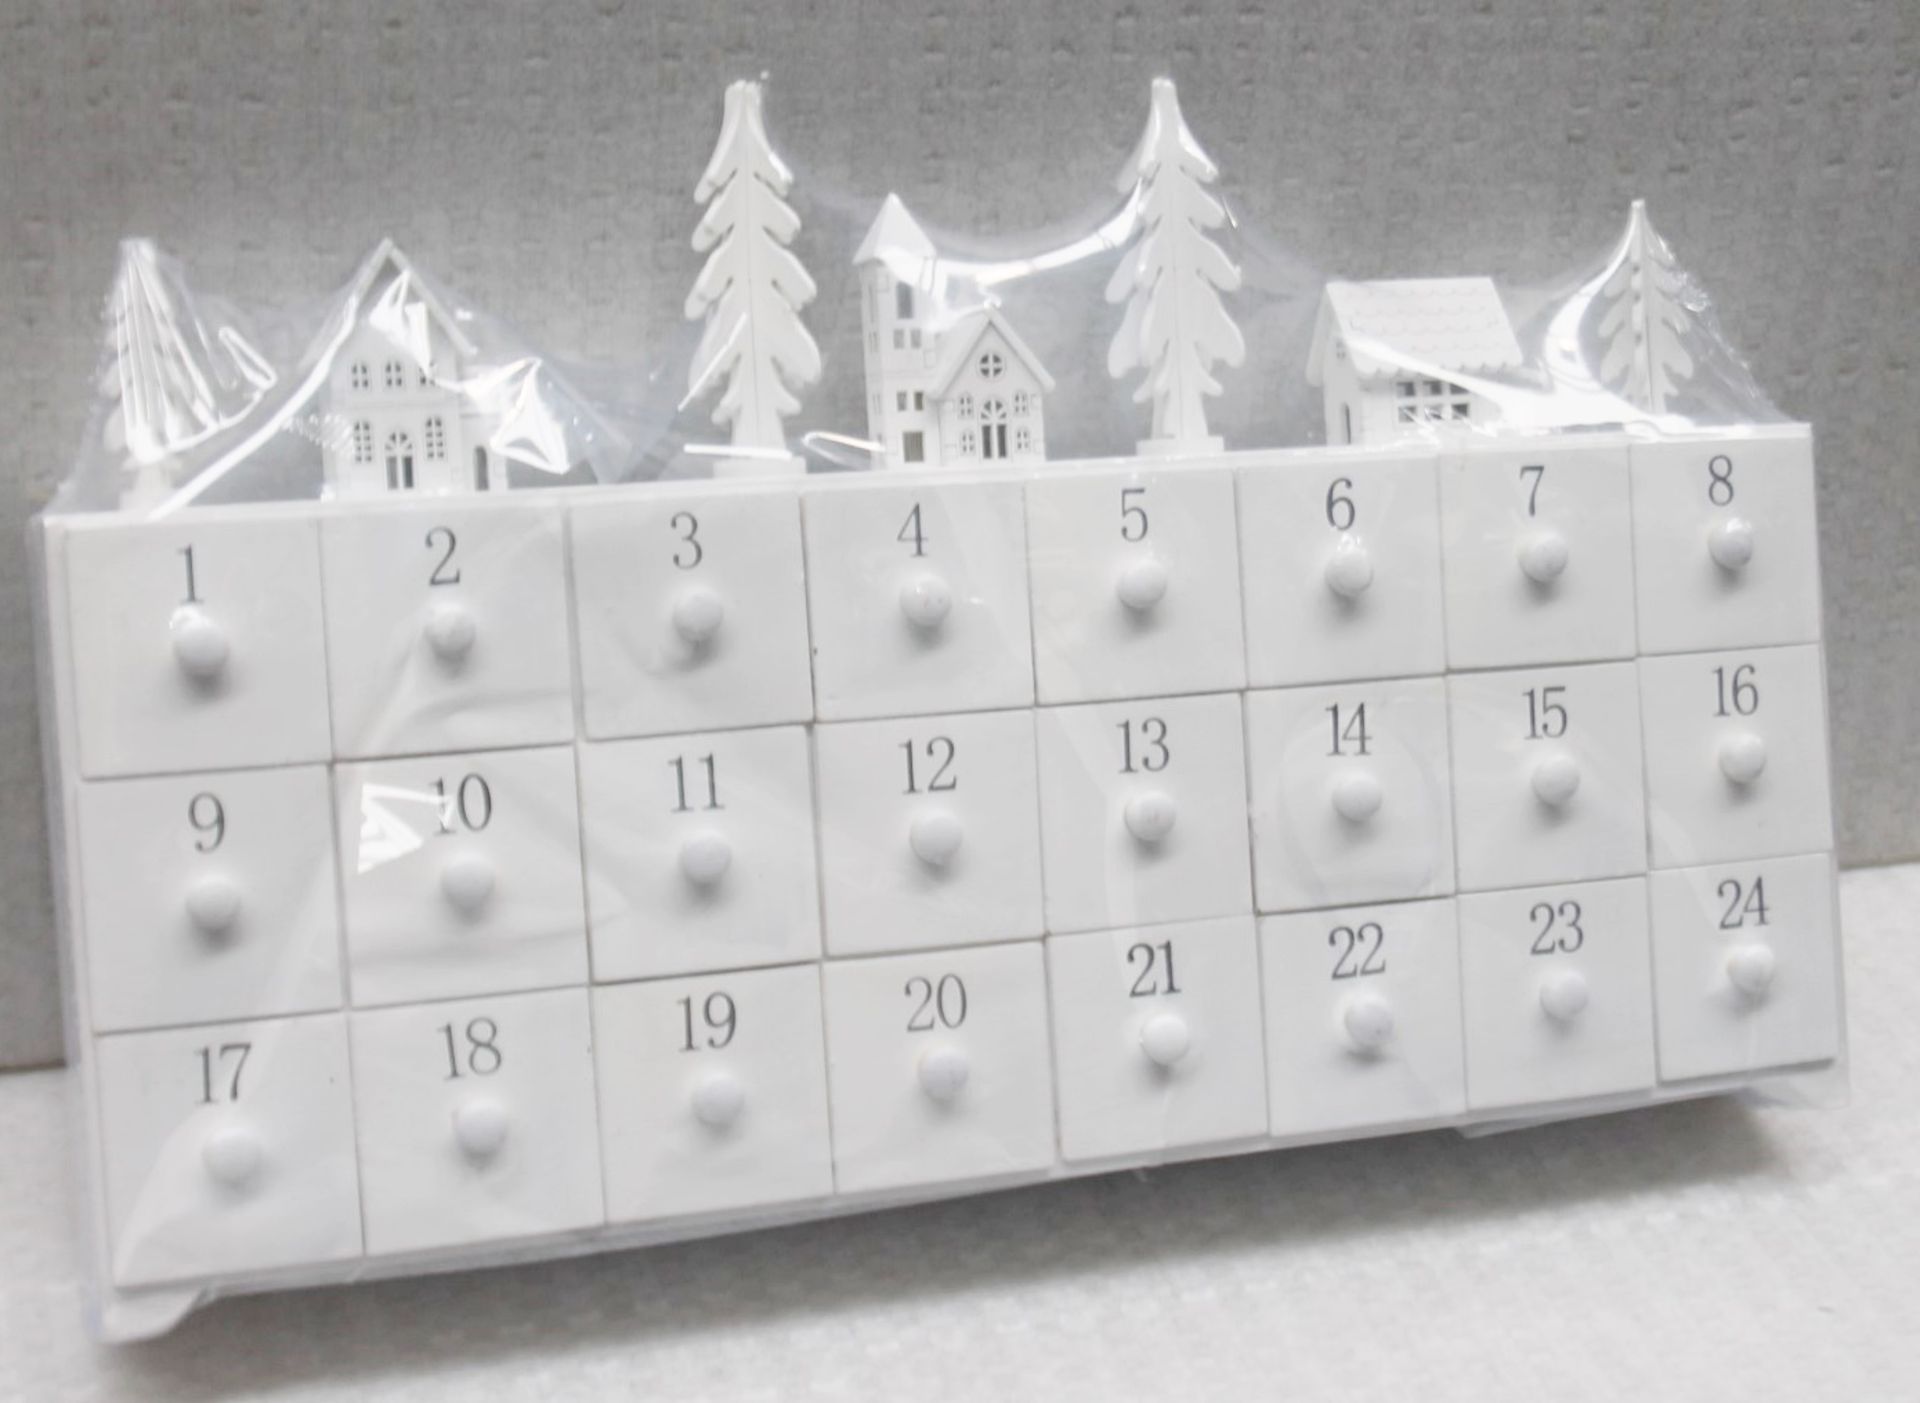 1 x HARRODS OF LONDON Wooden White Street Advent Calendar With Drawers - Ref: 6825630/HAS2164/WH2- - Image 3 of 5